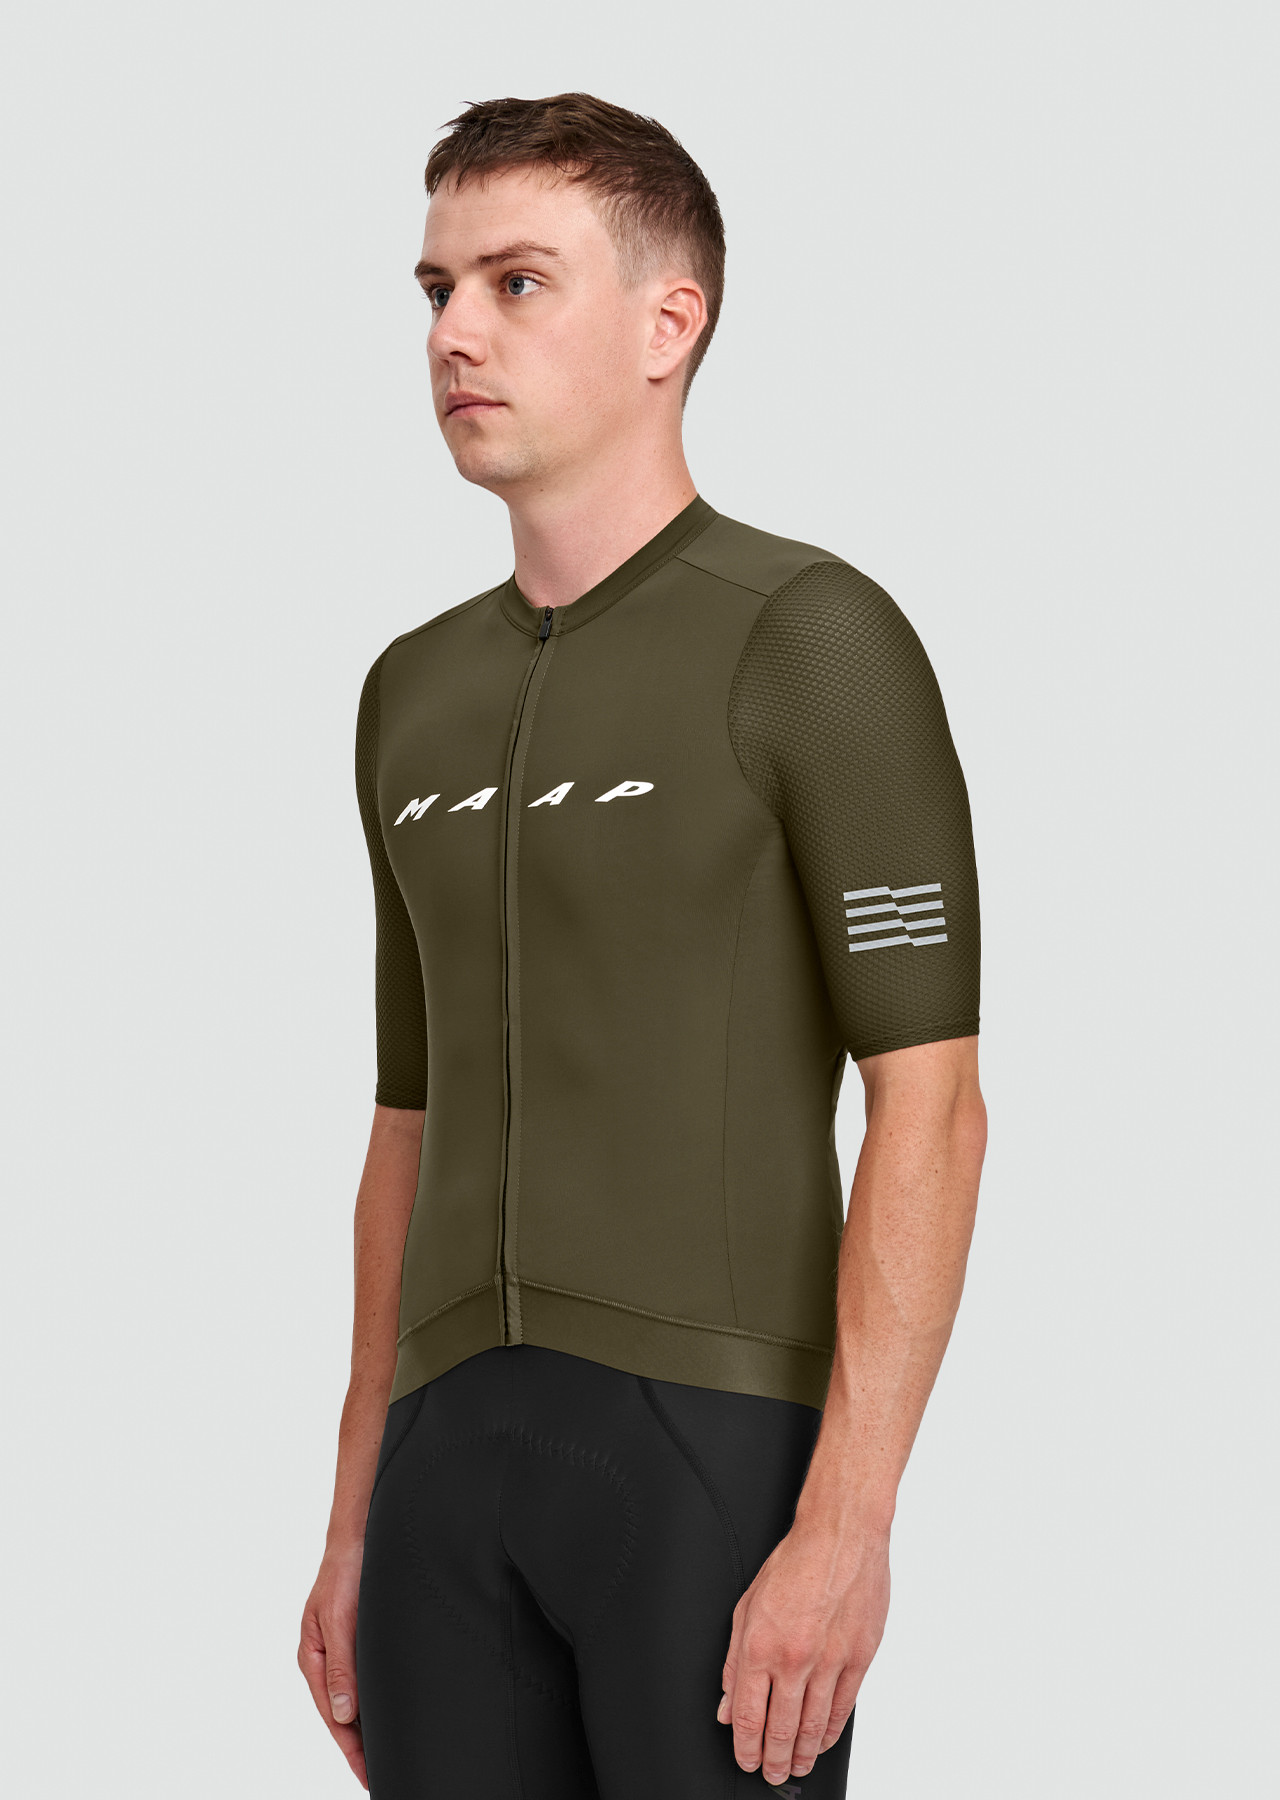 Maap Evade Pro Base Jersey - Olive